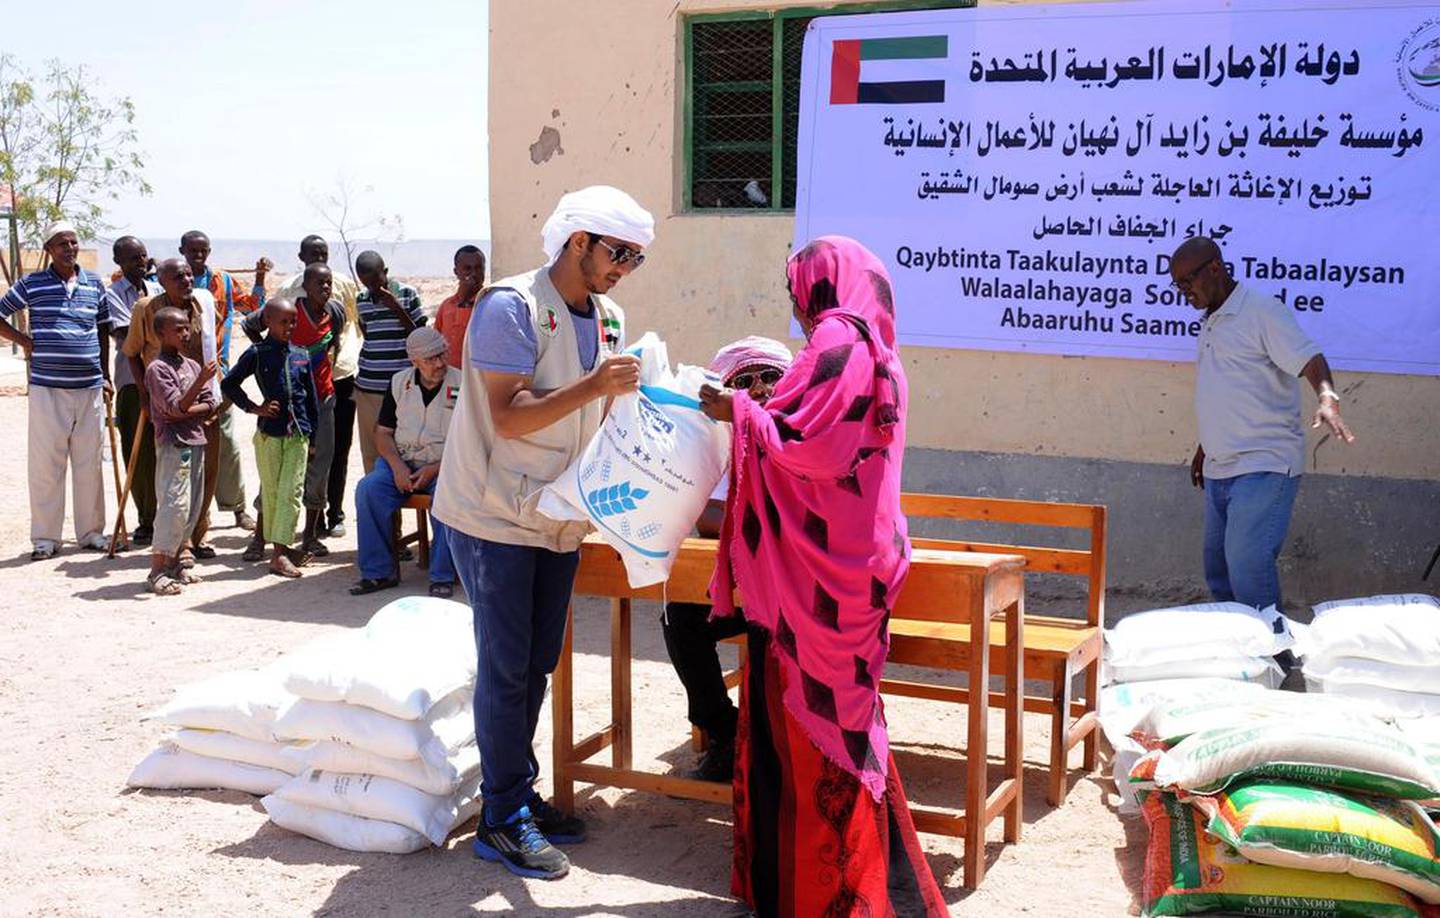 Food aid from the Khalifa bin Zayed Al Nahyan Foundation is distributed to families in Berbera, Somaliland. Wam